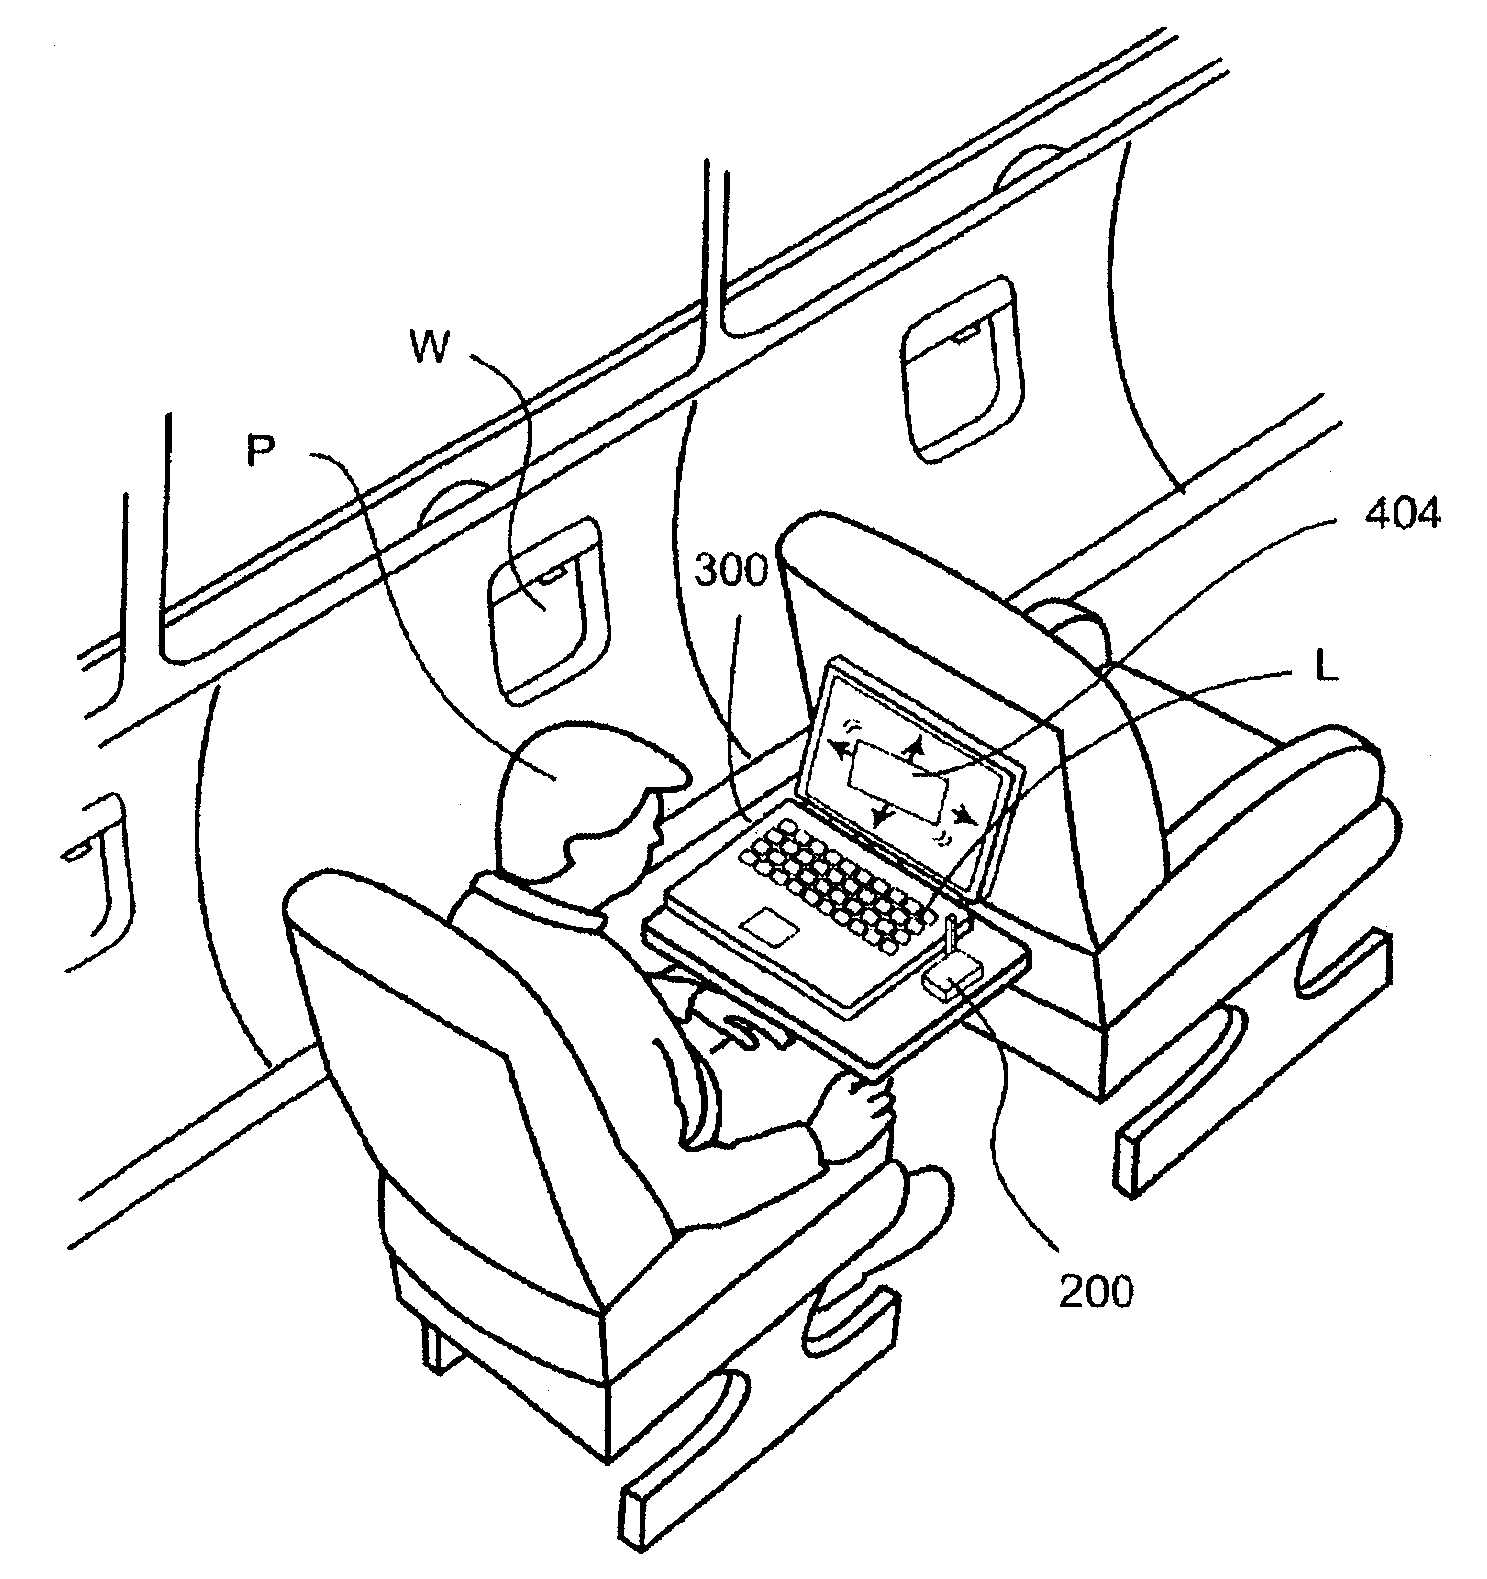 Motion-coupled visual environment for prevention or reduction of motion sickness and simulator/virtual environment sickness